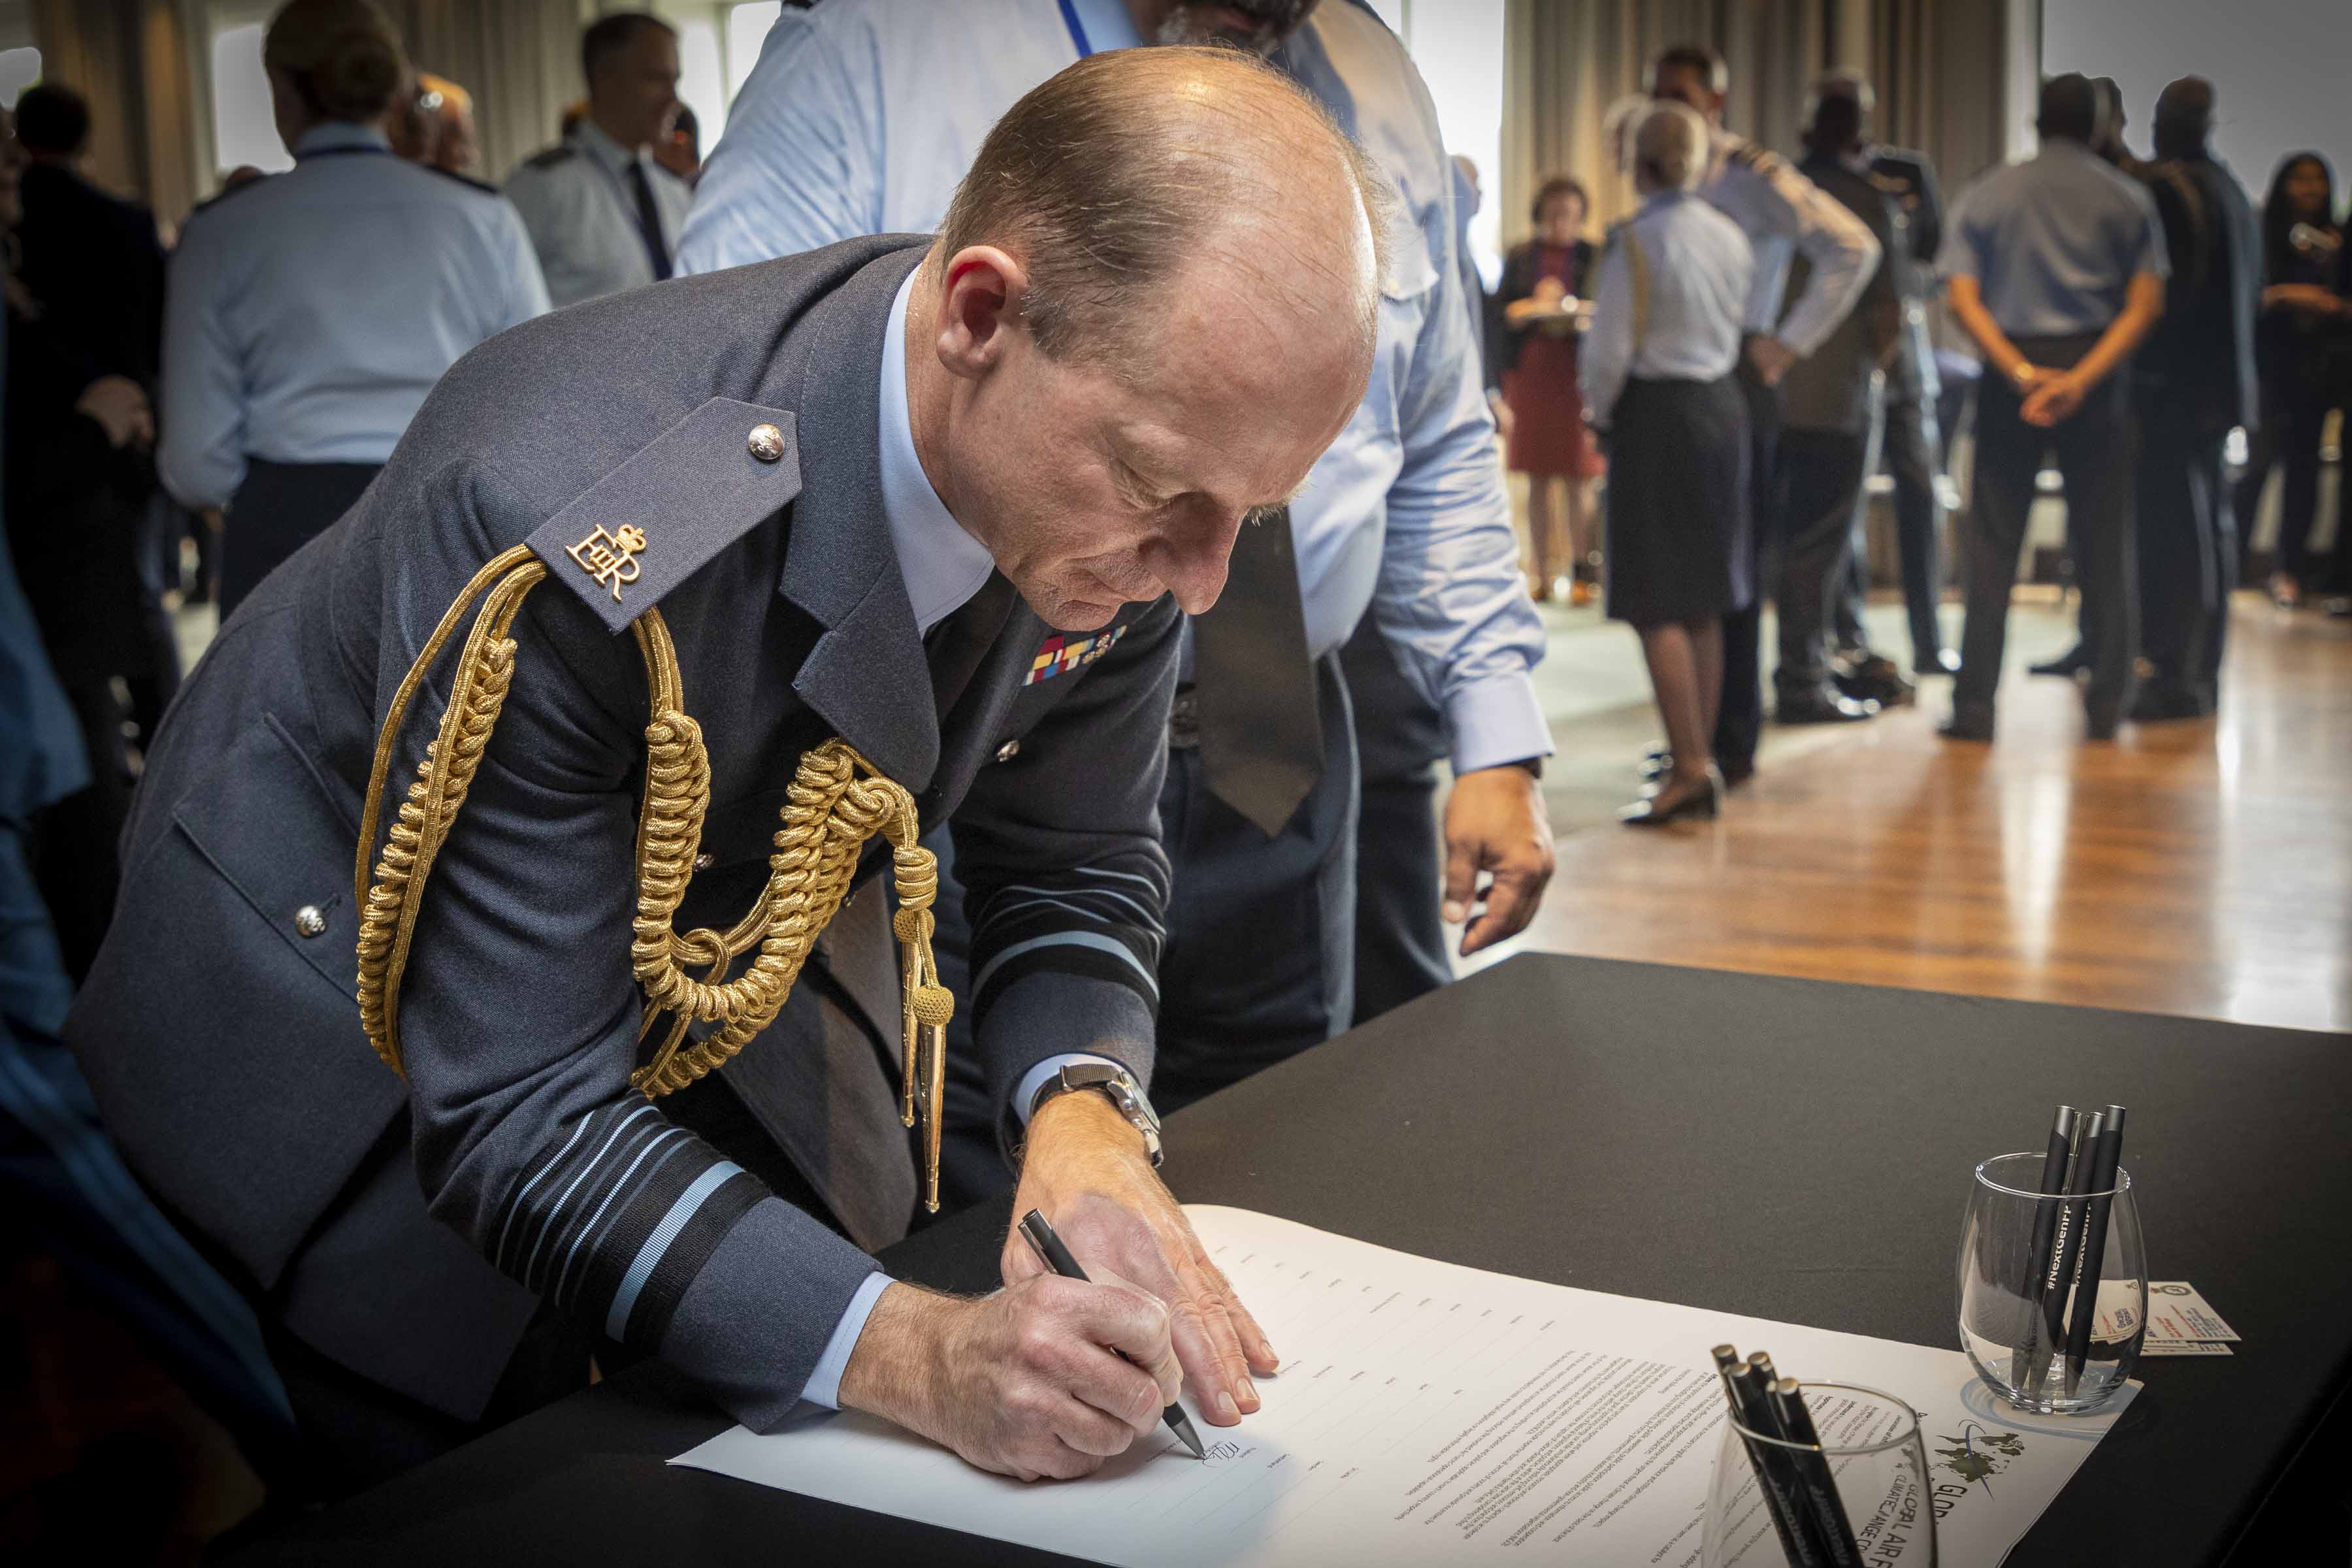 Image shows the Chief of the Air Staff signing document.